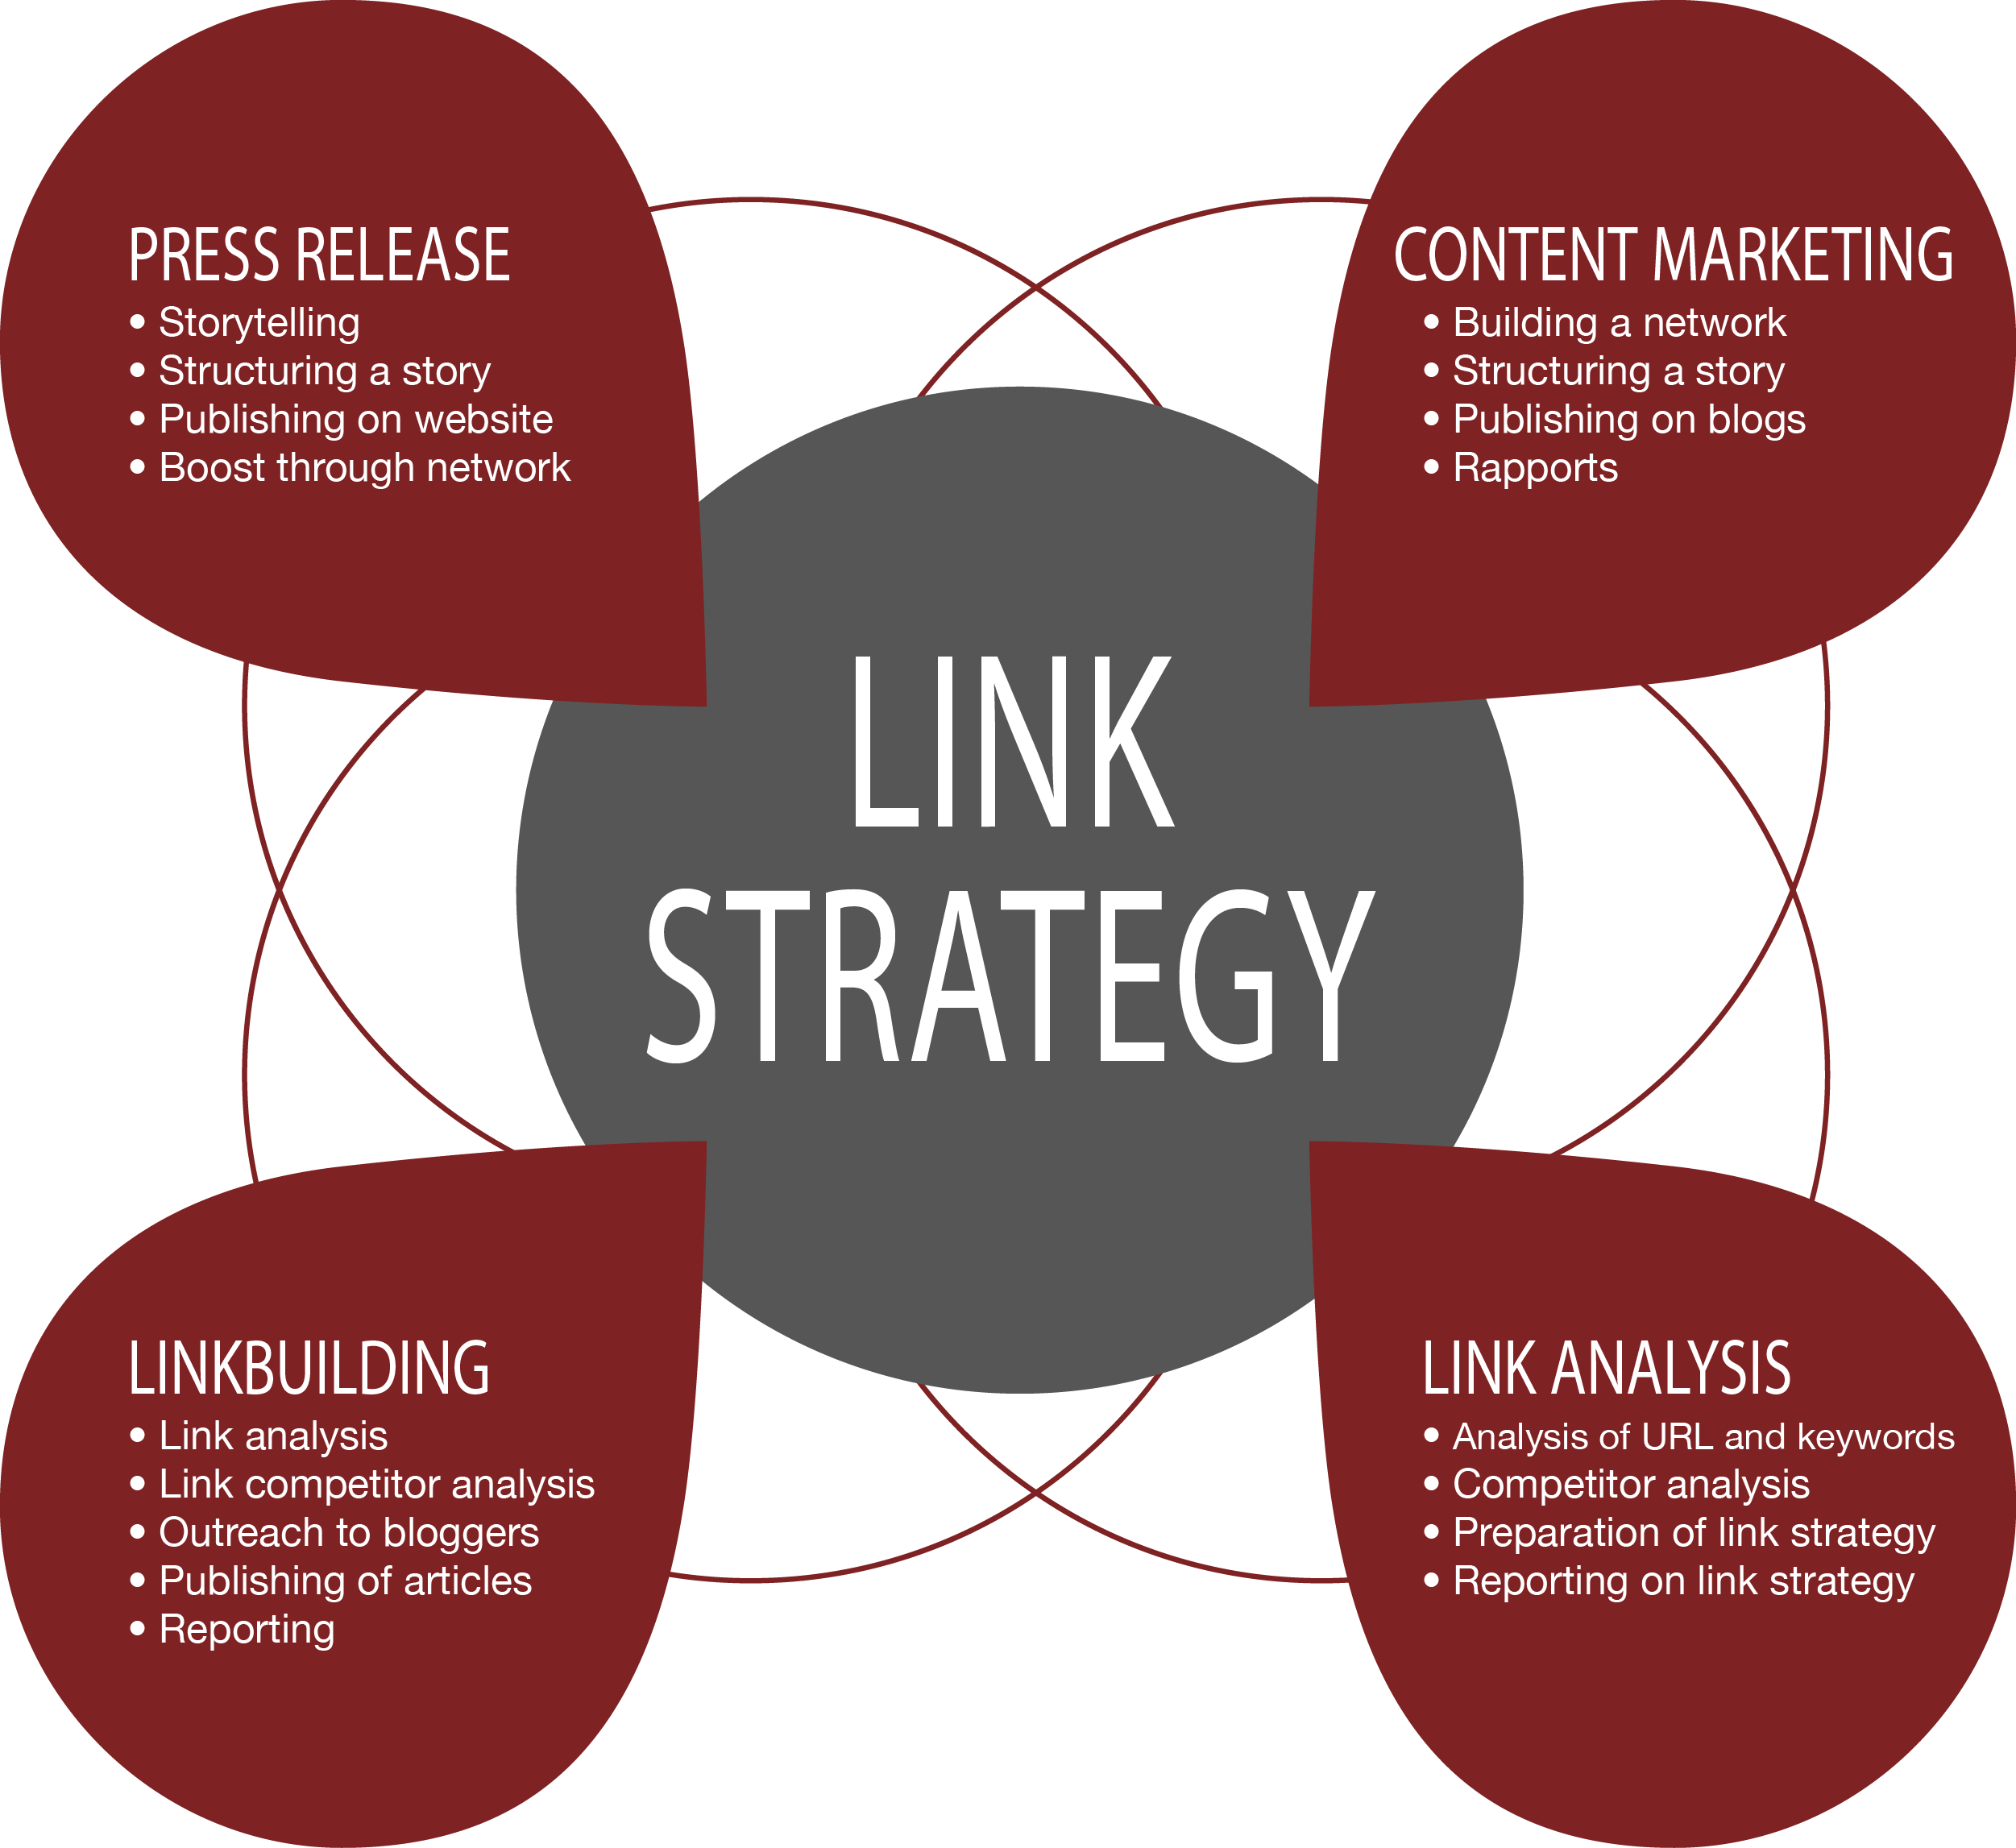 Link strategy